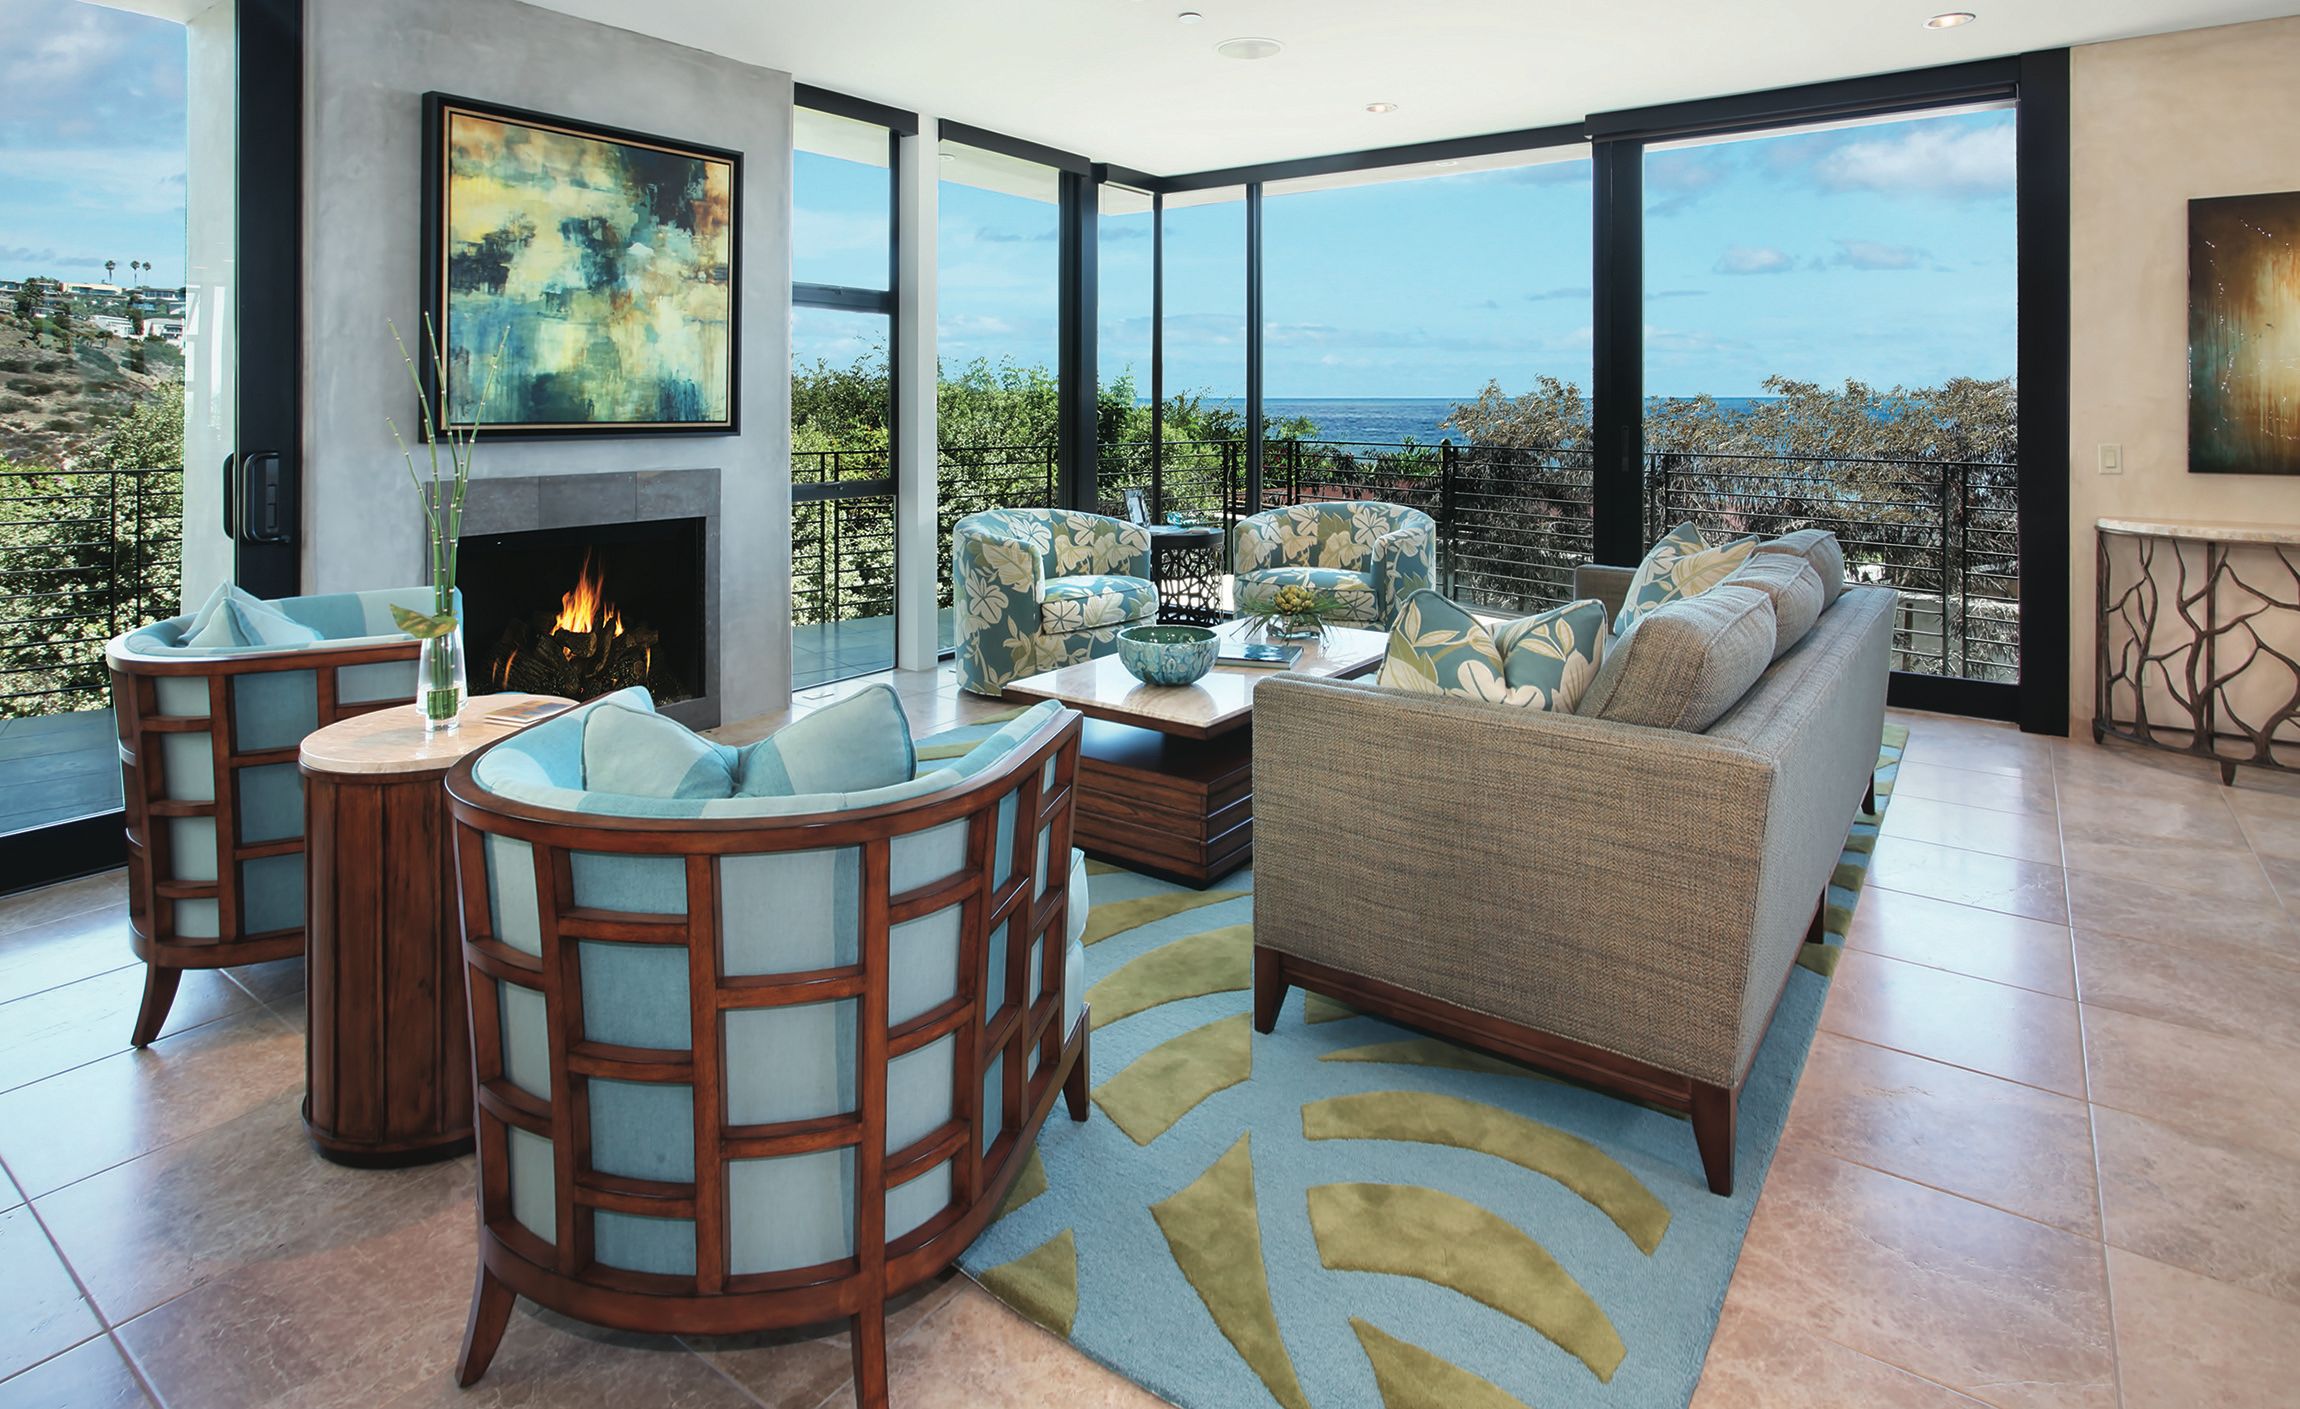 Cozy Modern Tropical Living Room With Tropical Floral Patterns (View 3 of 30)